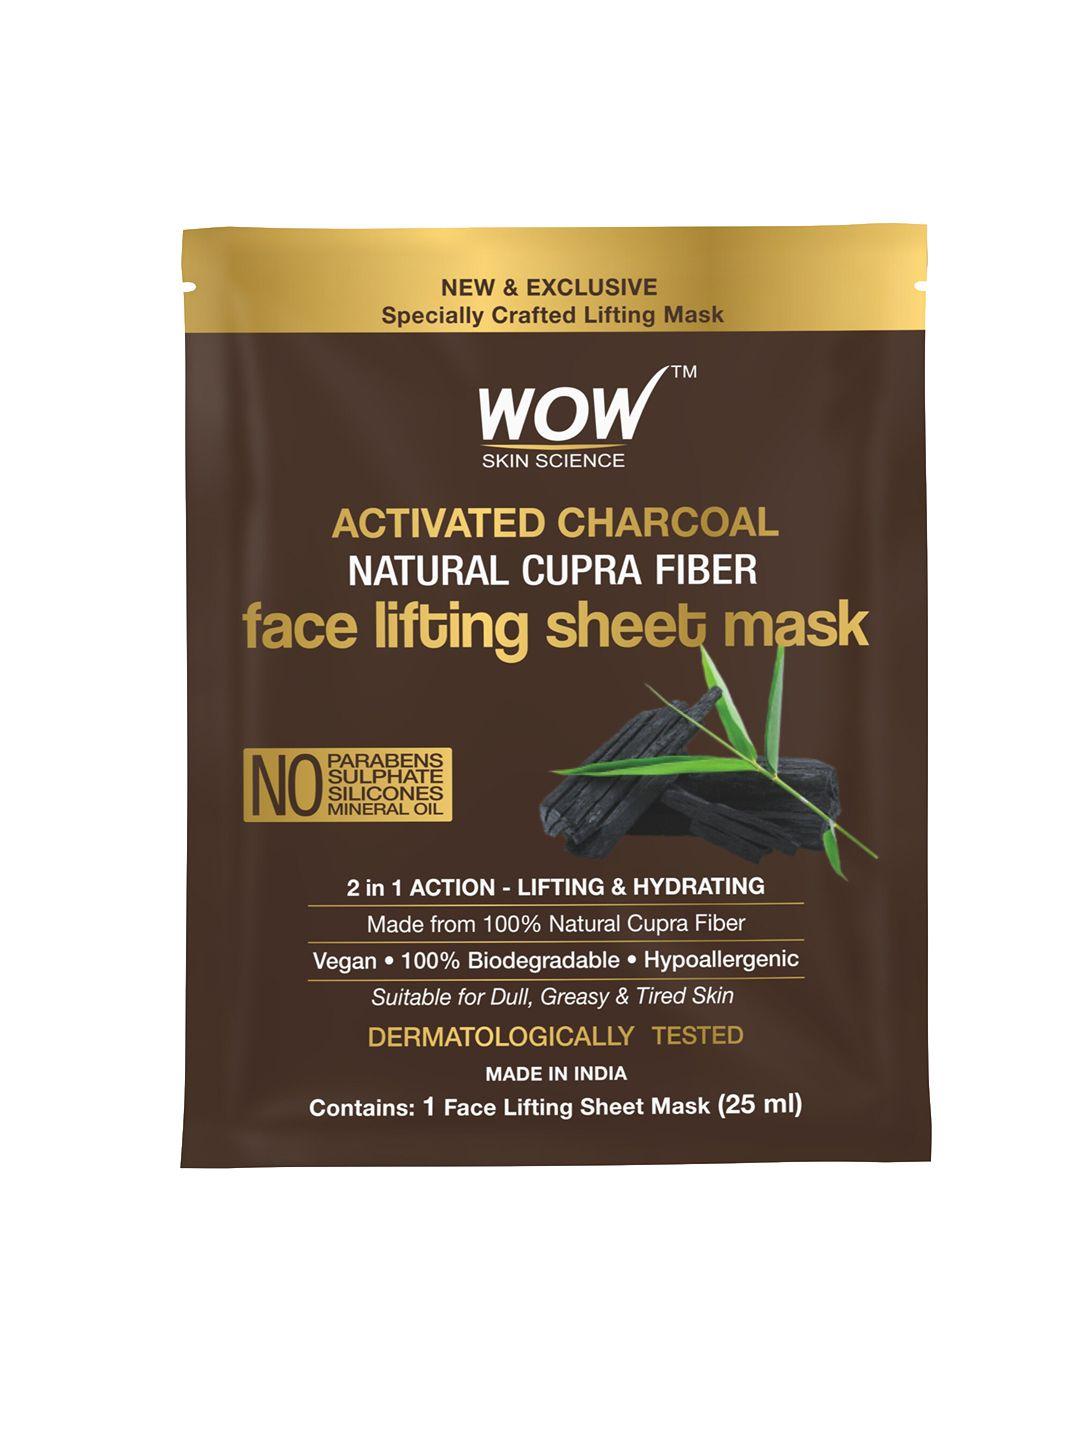 wow skin science activated charcoal natural cupra fiber face lifting sheet mask